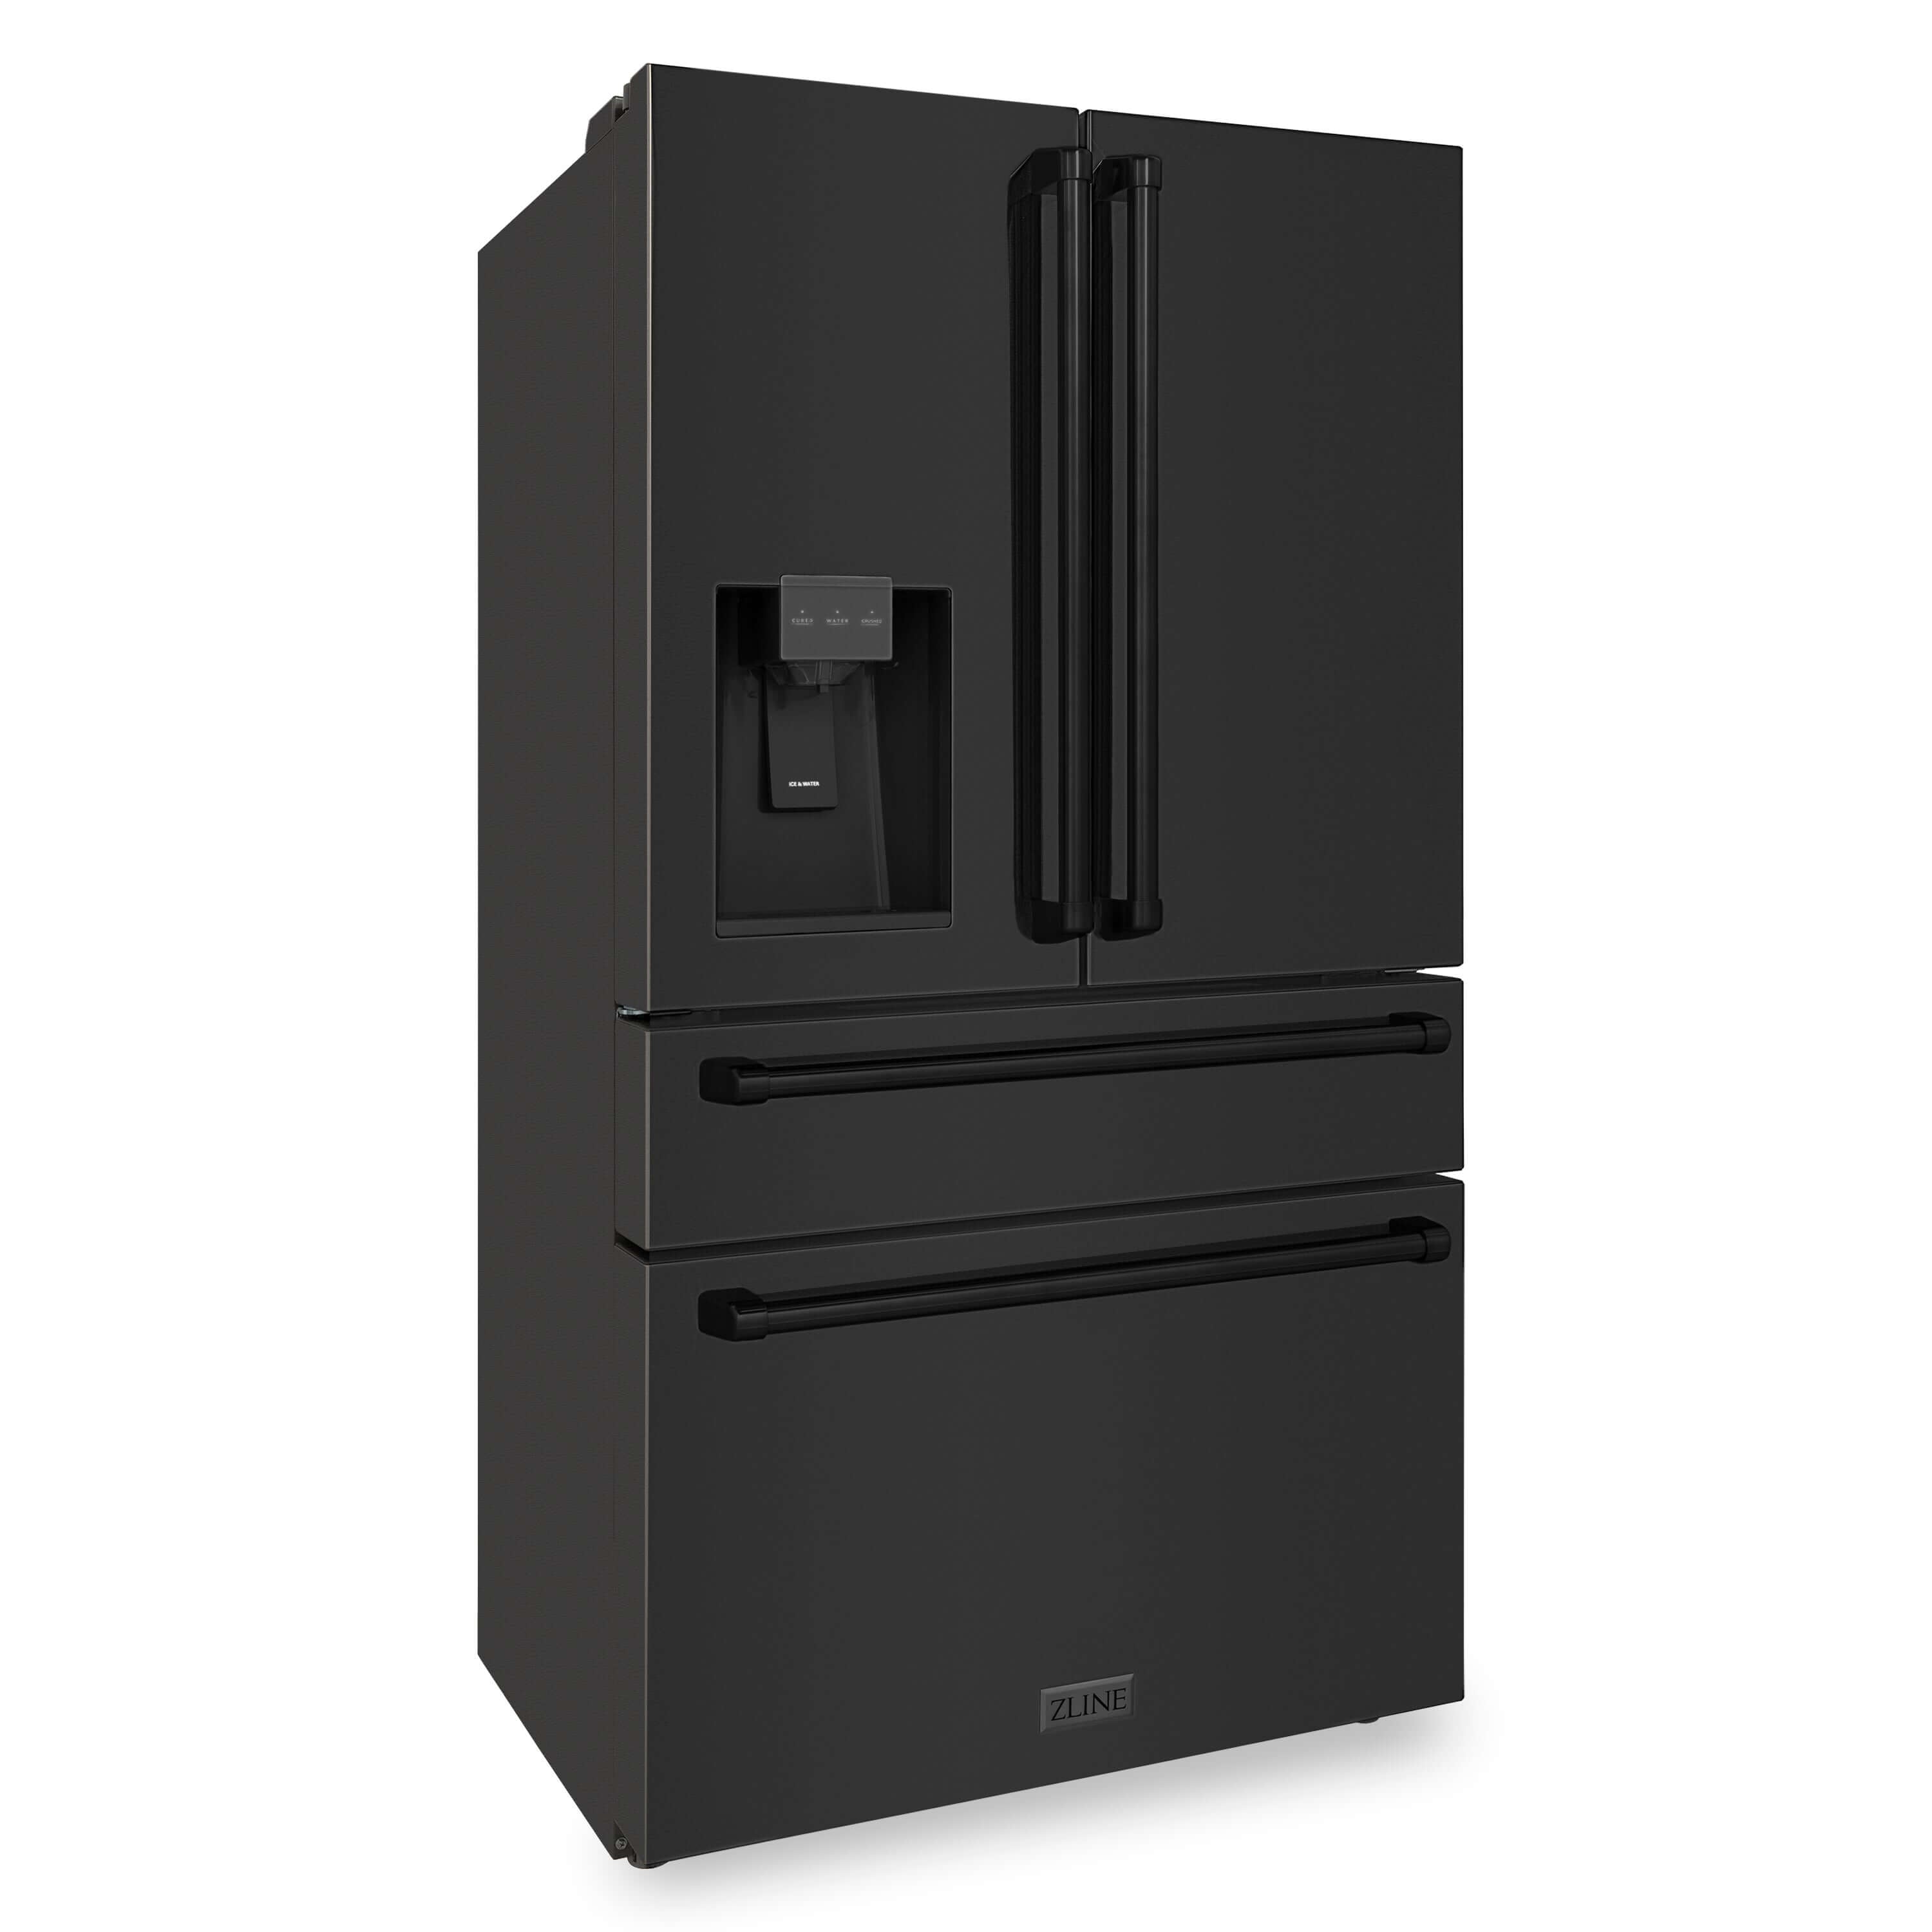 ZLINE 36 in. 21.6 cu. ft Freestanding French Door Fingerprint Resistant Refrigerator with External Water and Ice Dispenser in Black Stainless Steel (RFM-W-36-BS) side, closed.